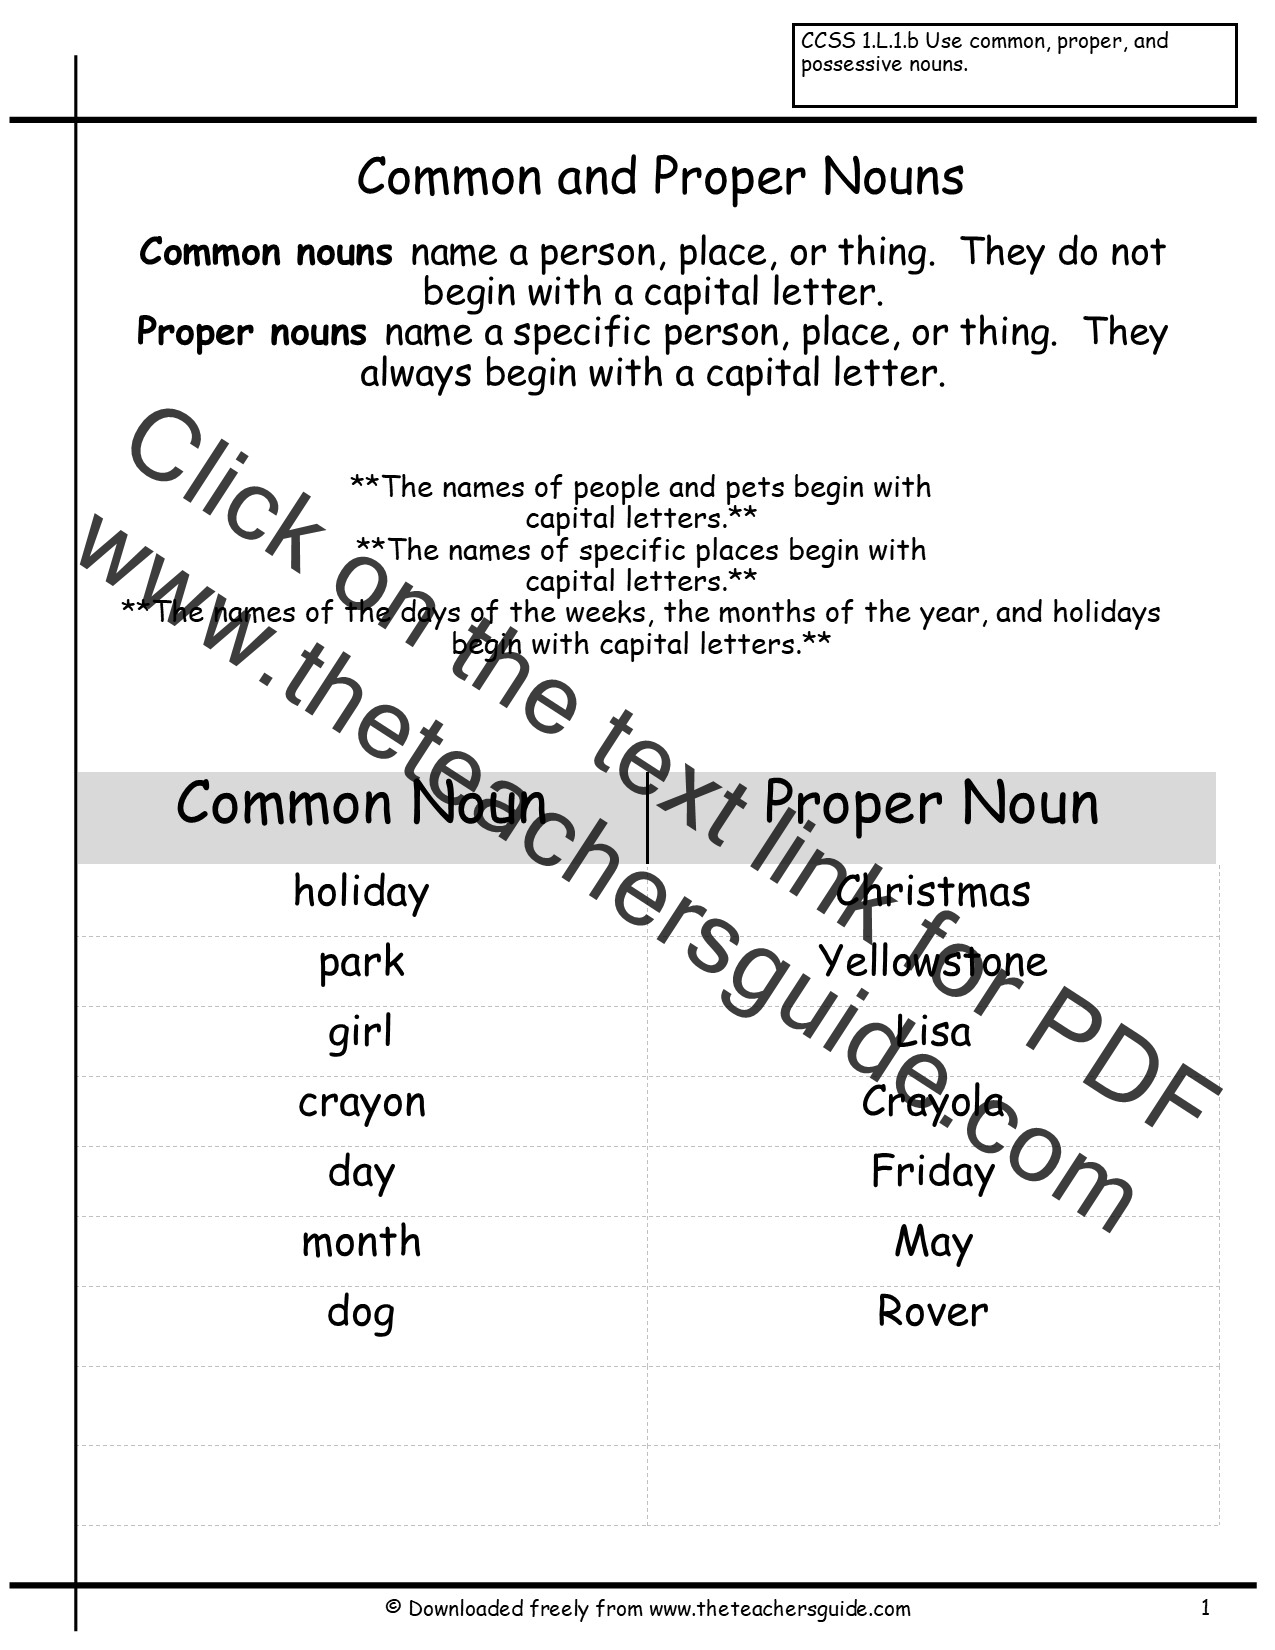 Common And Proper Nouns Worksheets From The Teacher s Guide